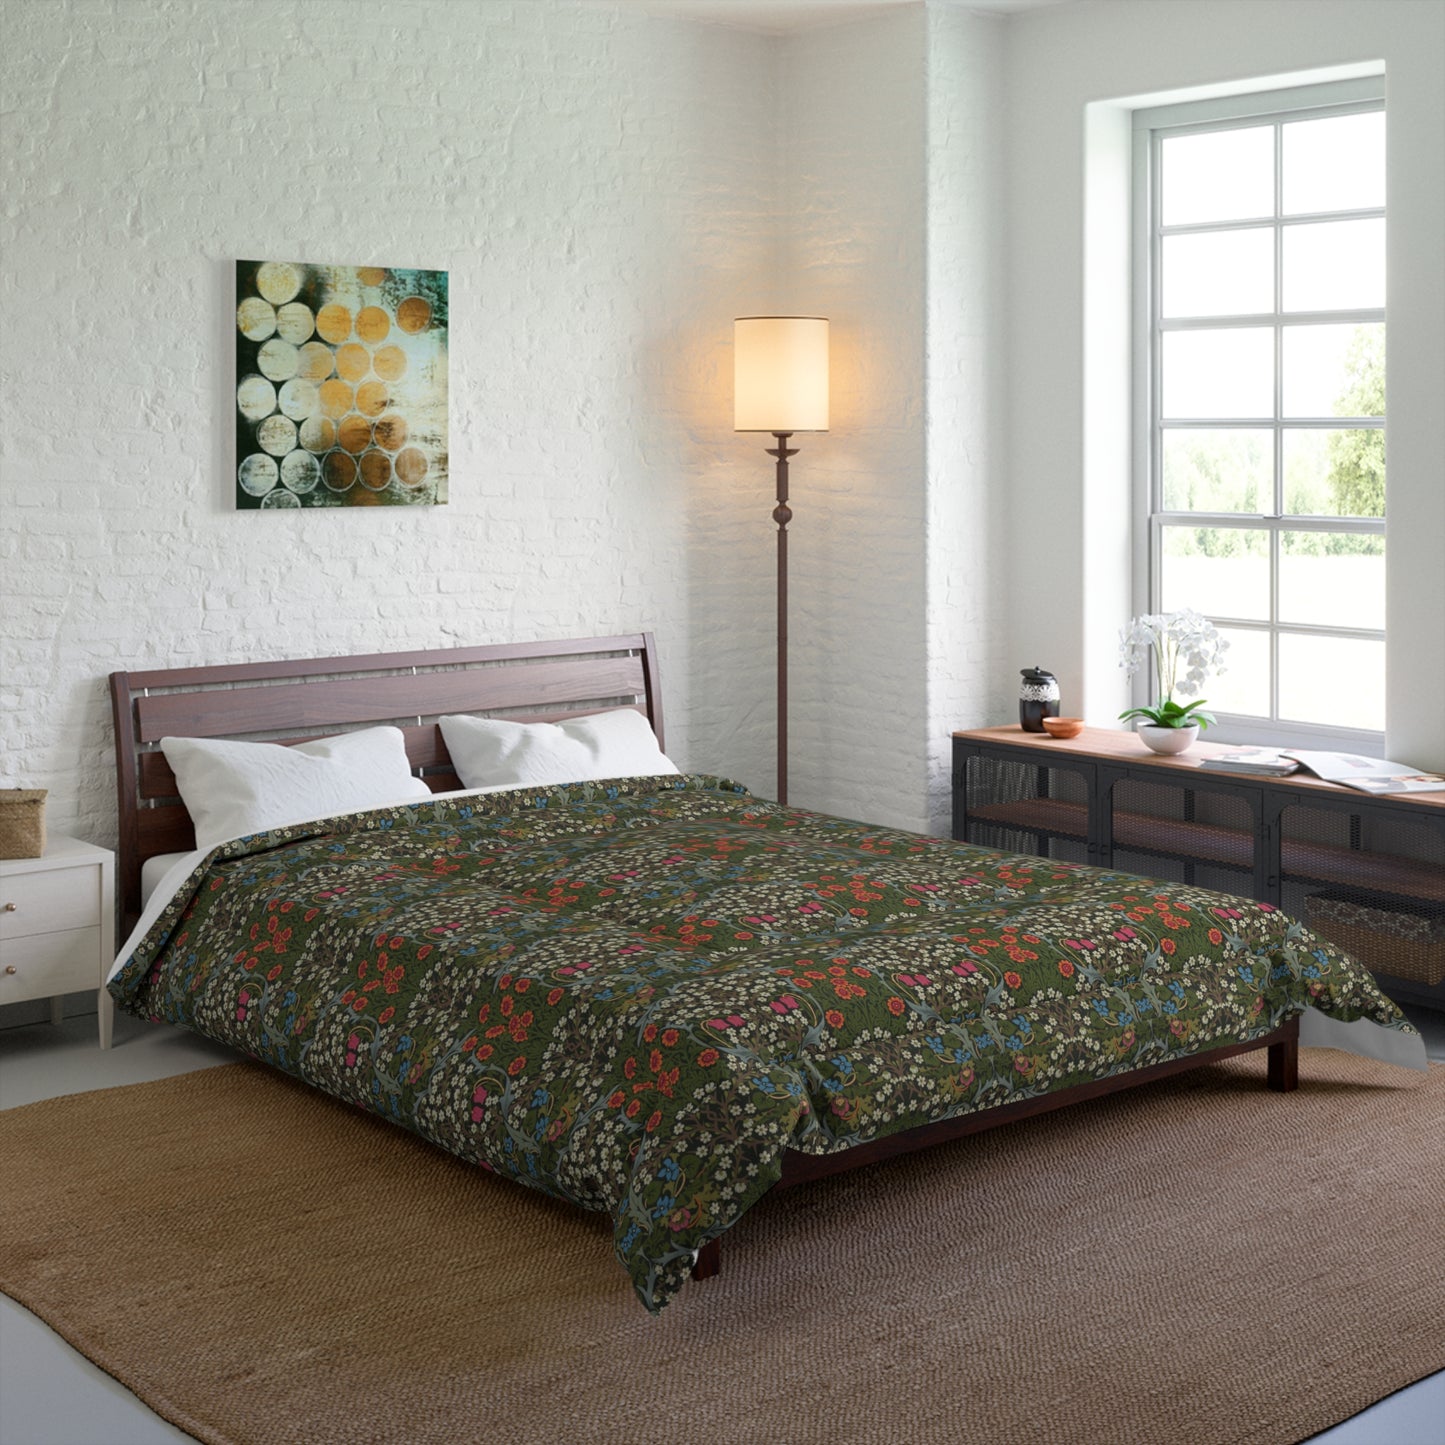 william-morris-co-comforter-blackthorn-collection-1